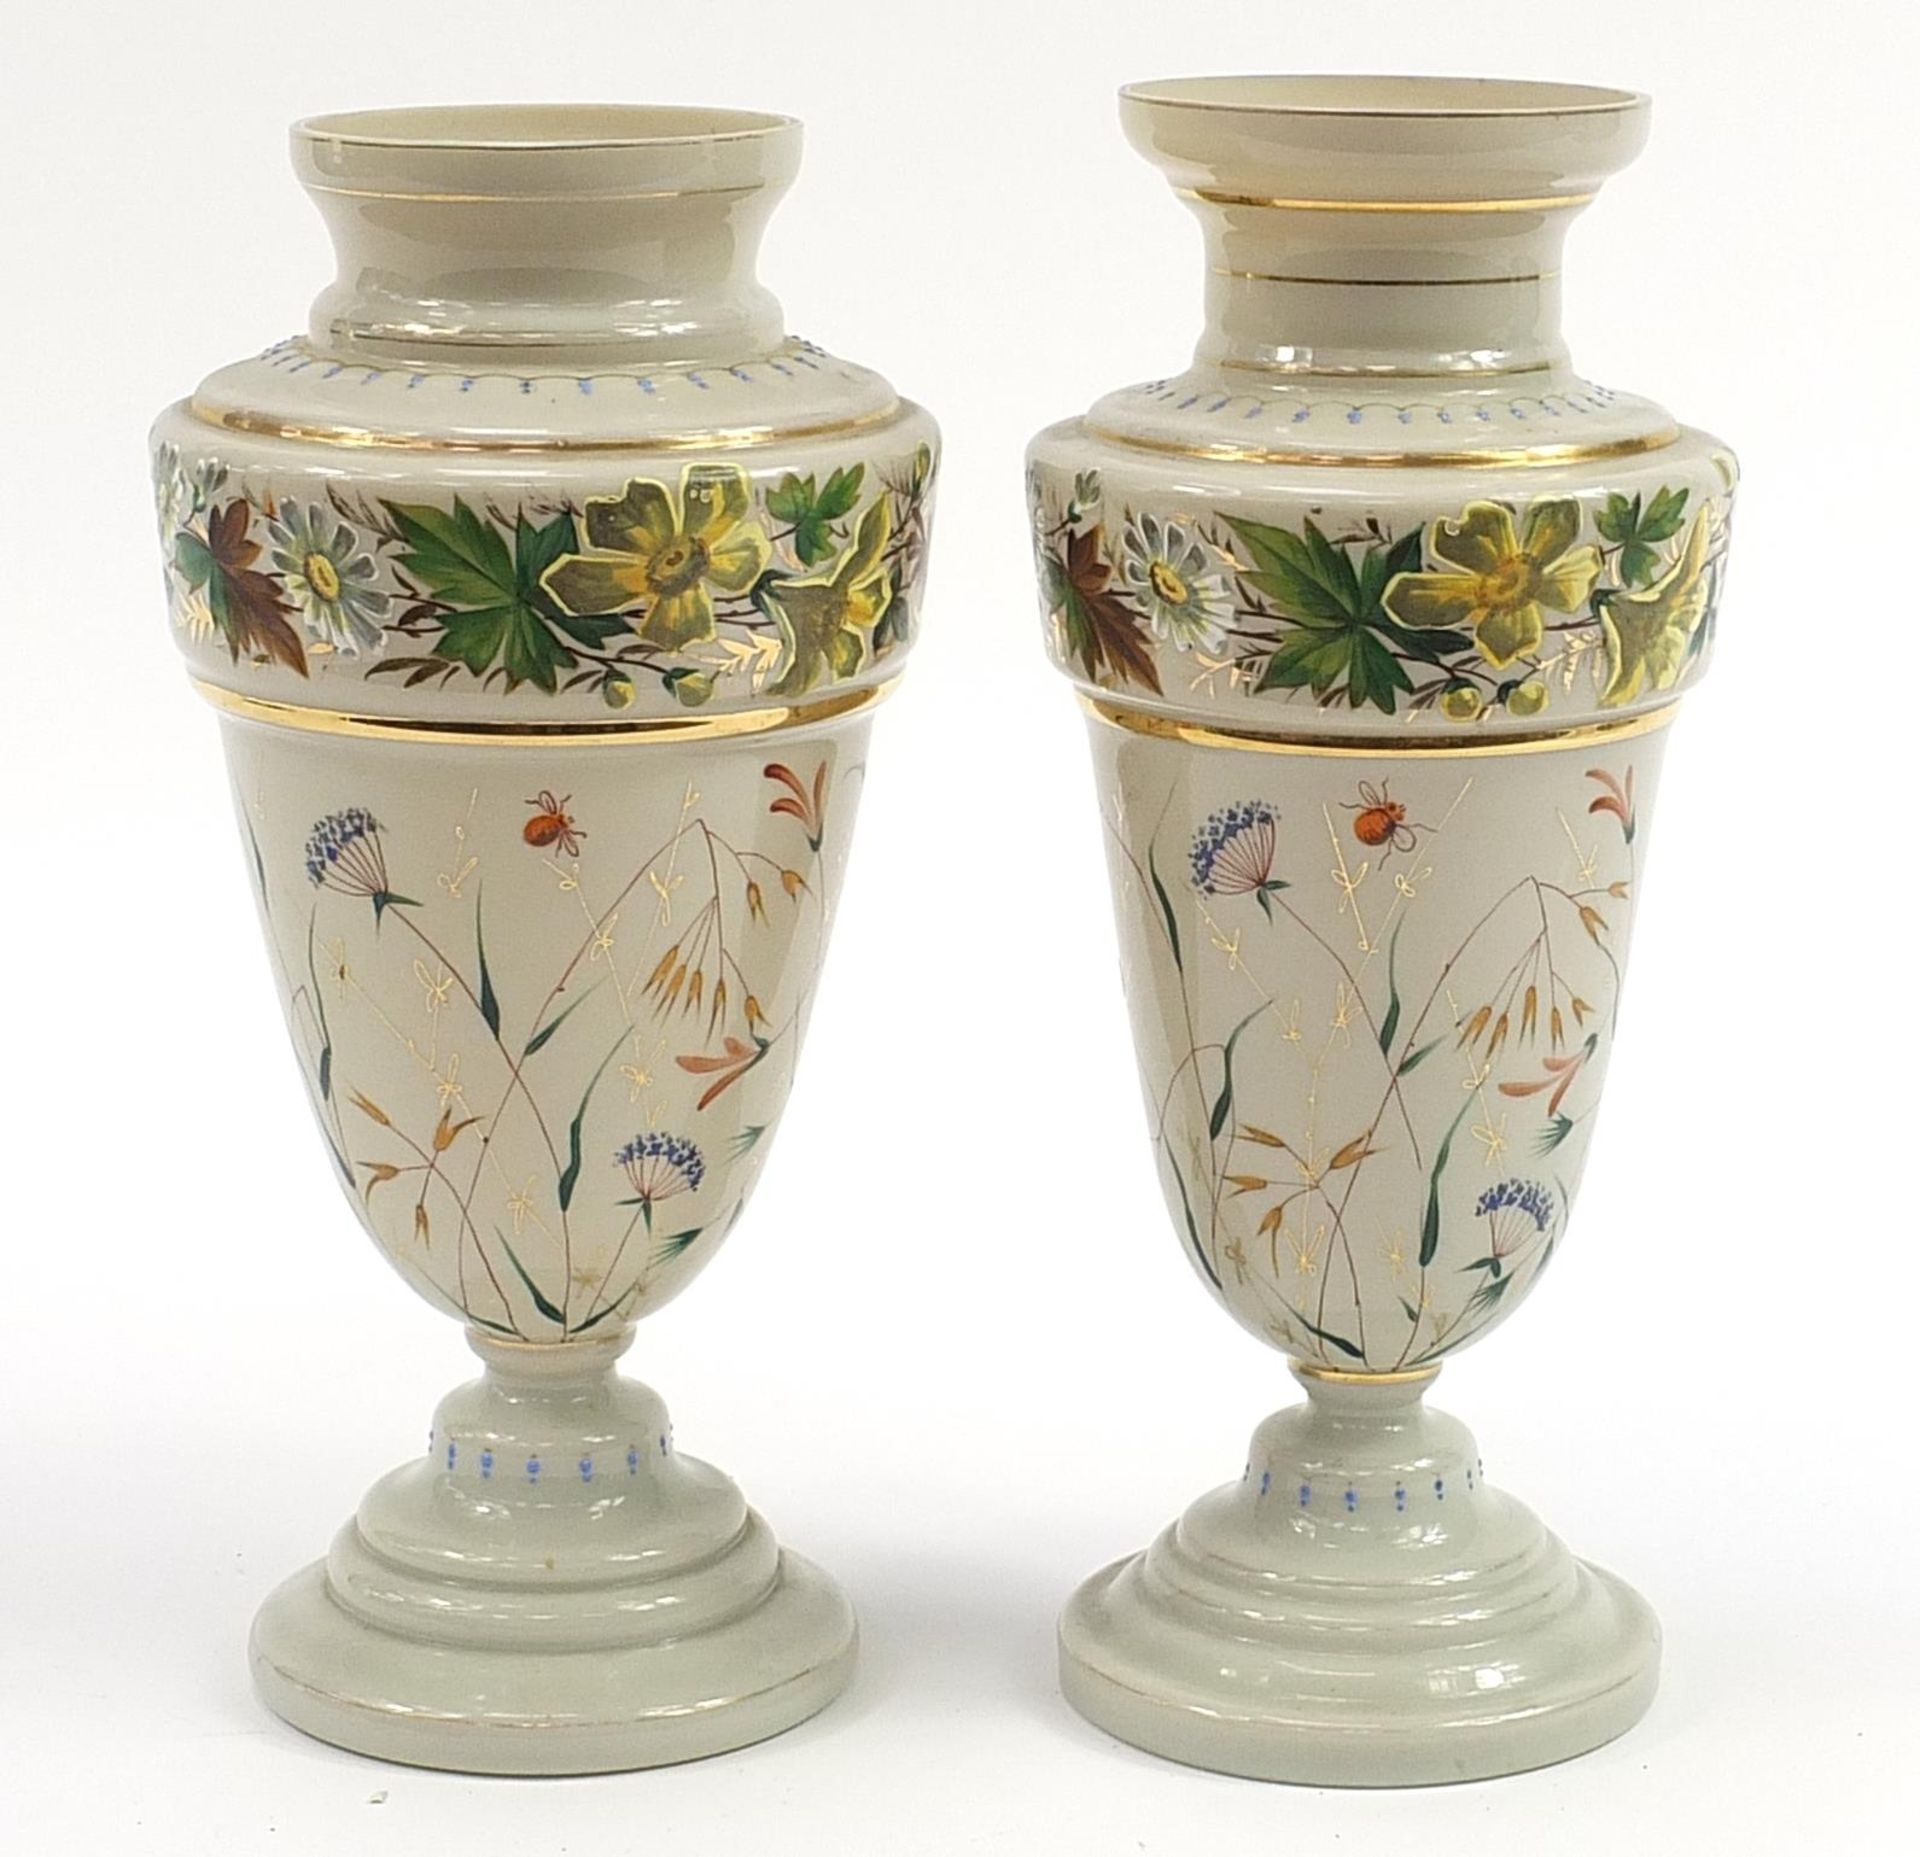 Matched pair of 19th century opaline glass vases, hand painted with flowers and insects amongst - Image 2 of 11